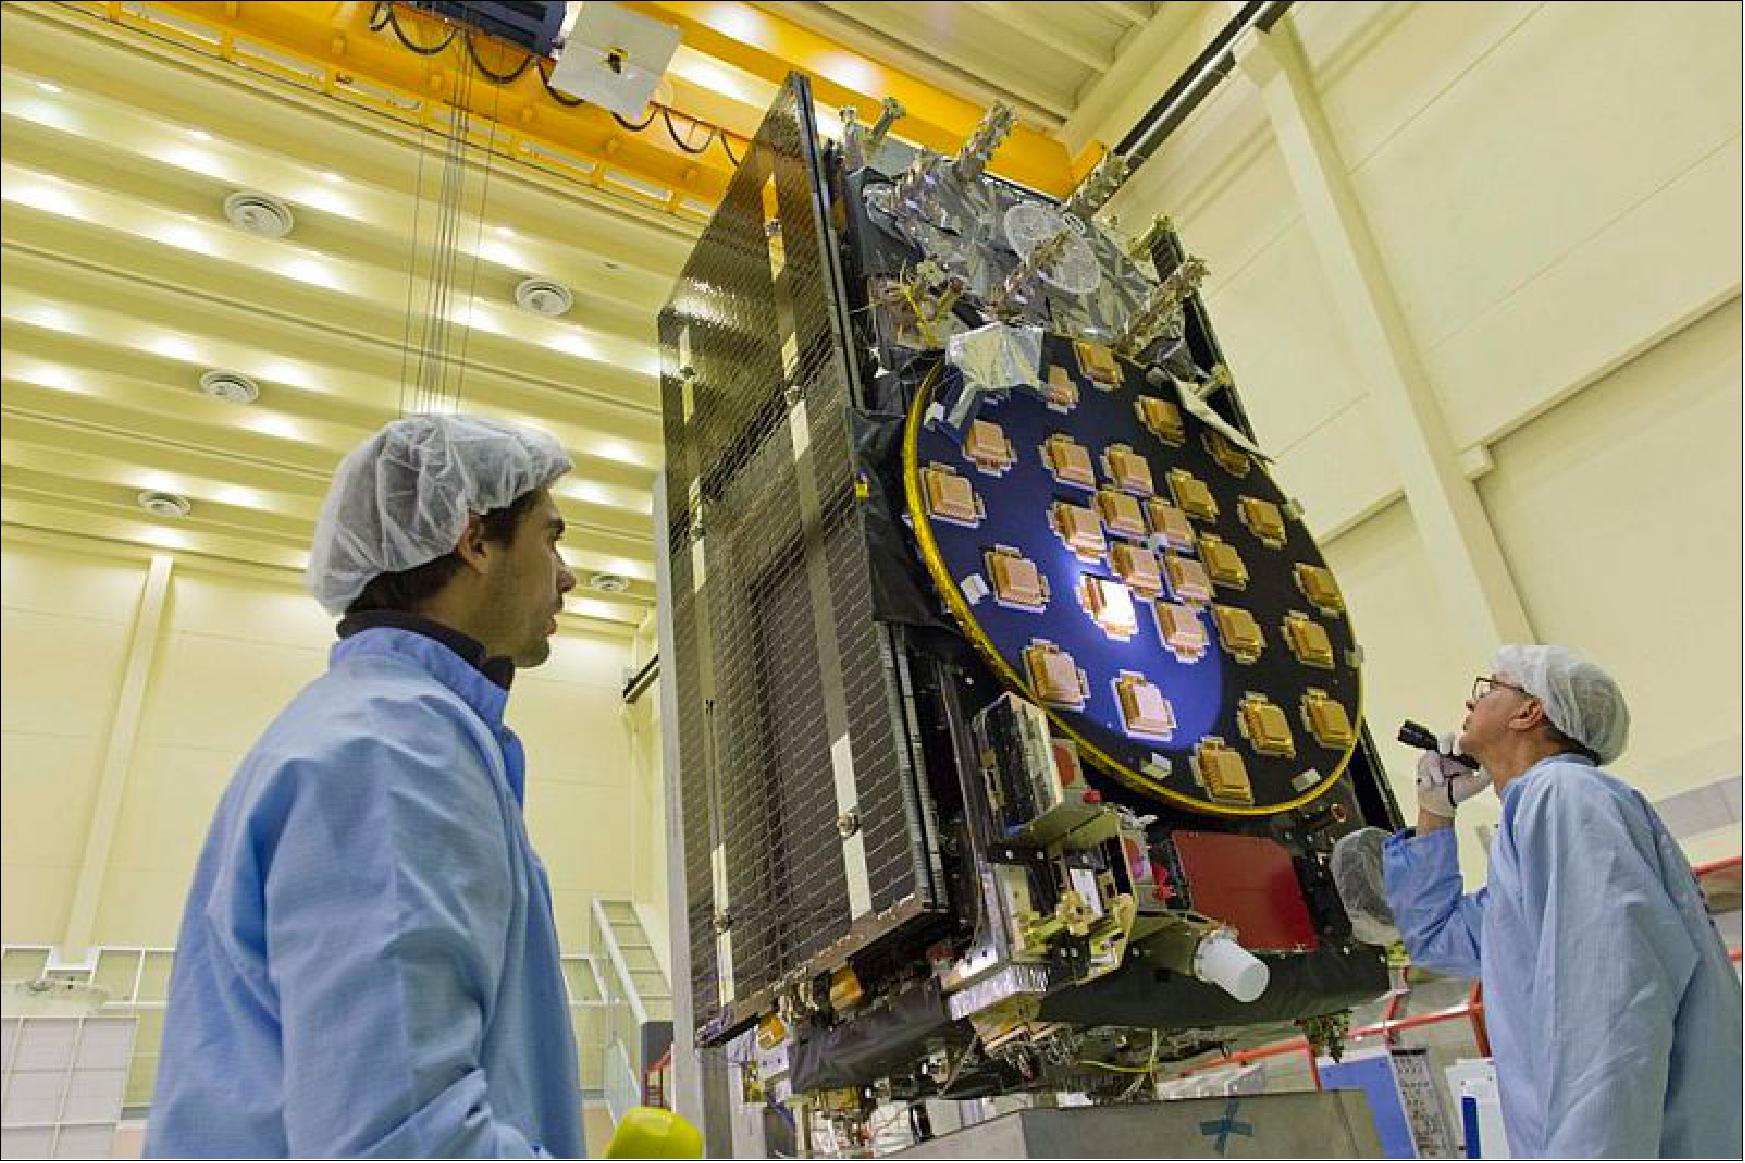 Figure 19: The main antenna of the FM2 satellite is being inspected at ESTEC prior to mass property testing in August 2013 (image credit: ESA, Anneke Le Floc'h) 17)